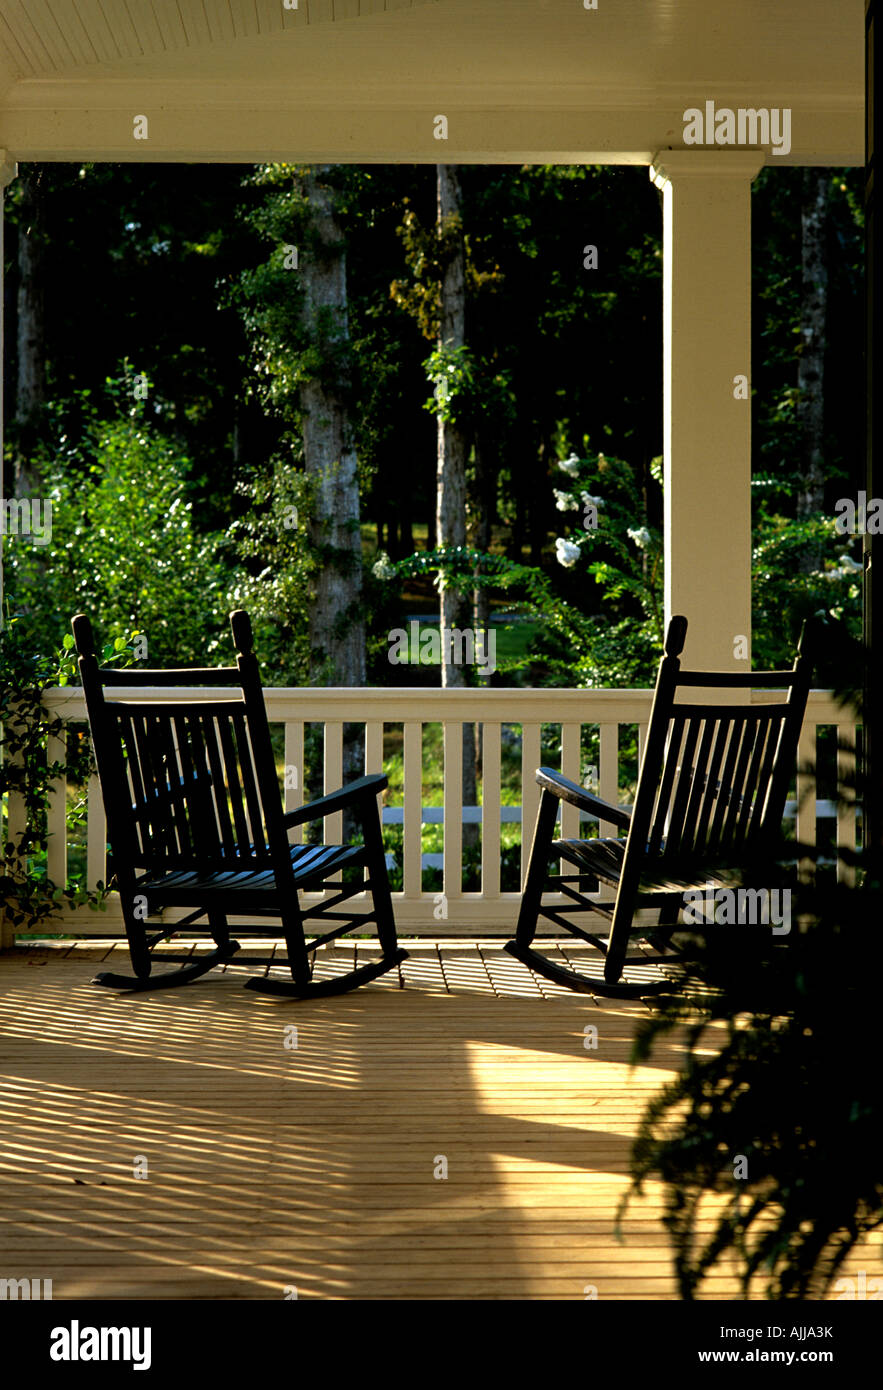 Wooden rocking chairs on veranda with garden view Stock Photo